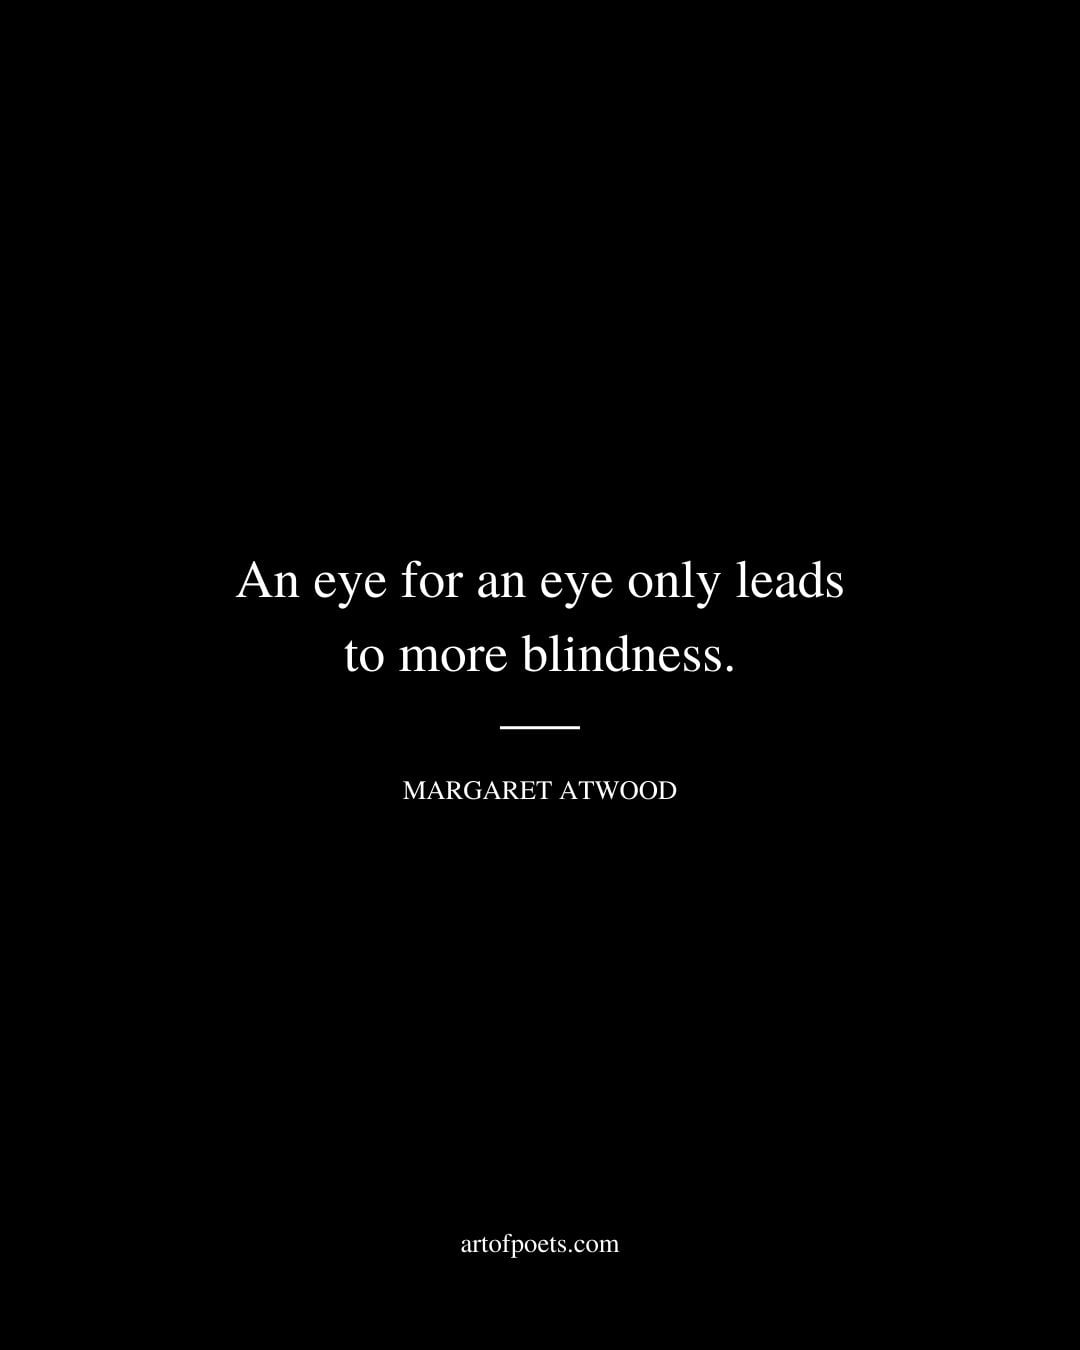 An eye for an eye only leads to more blindness